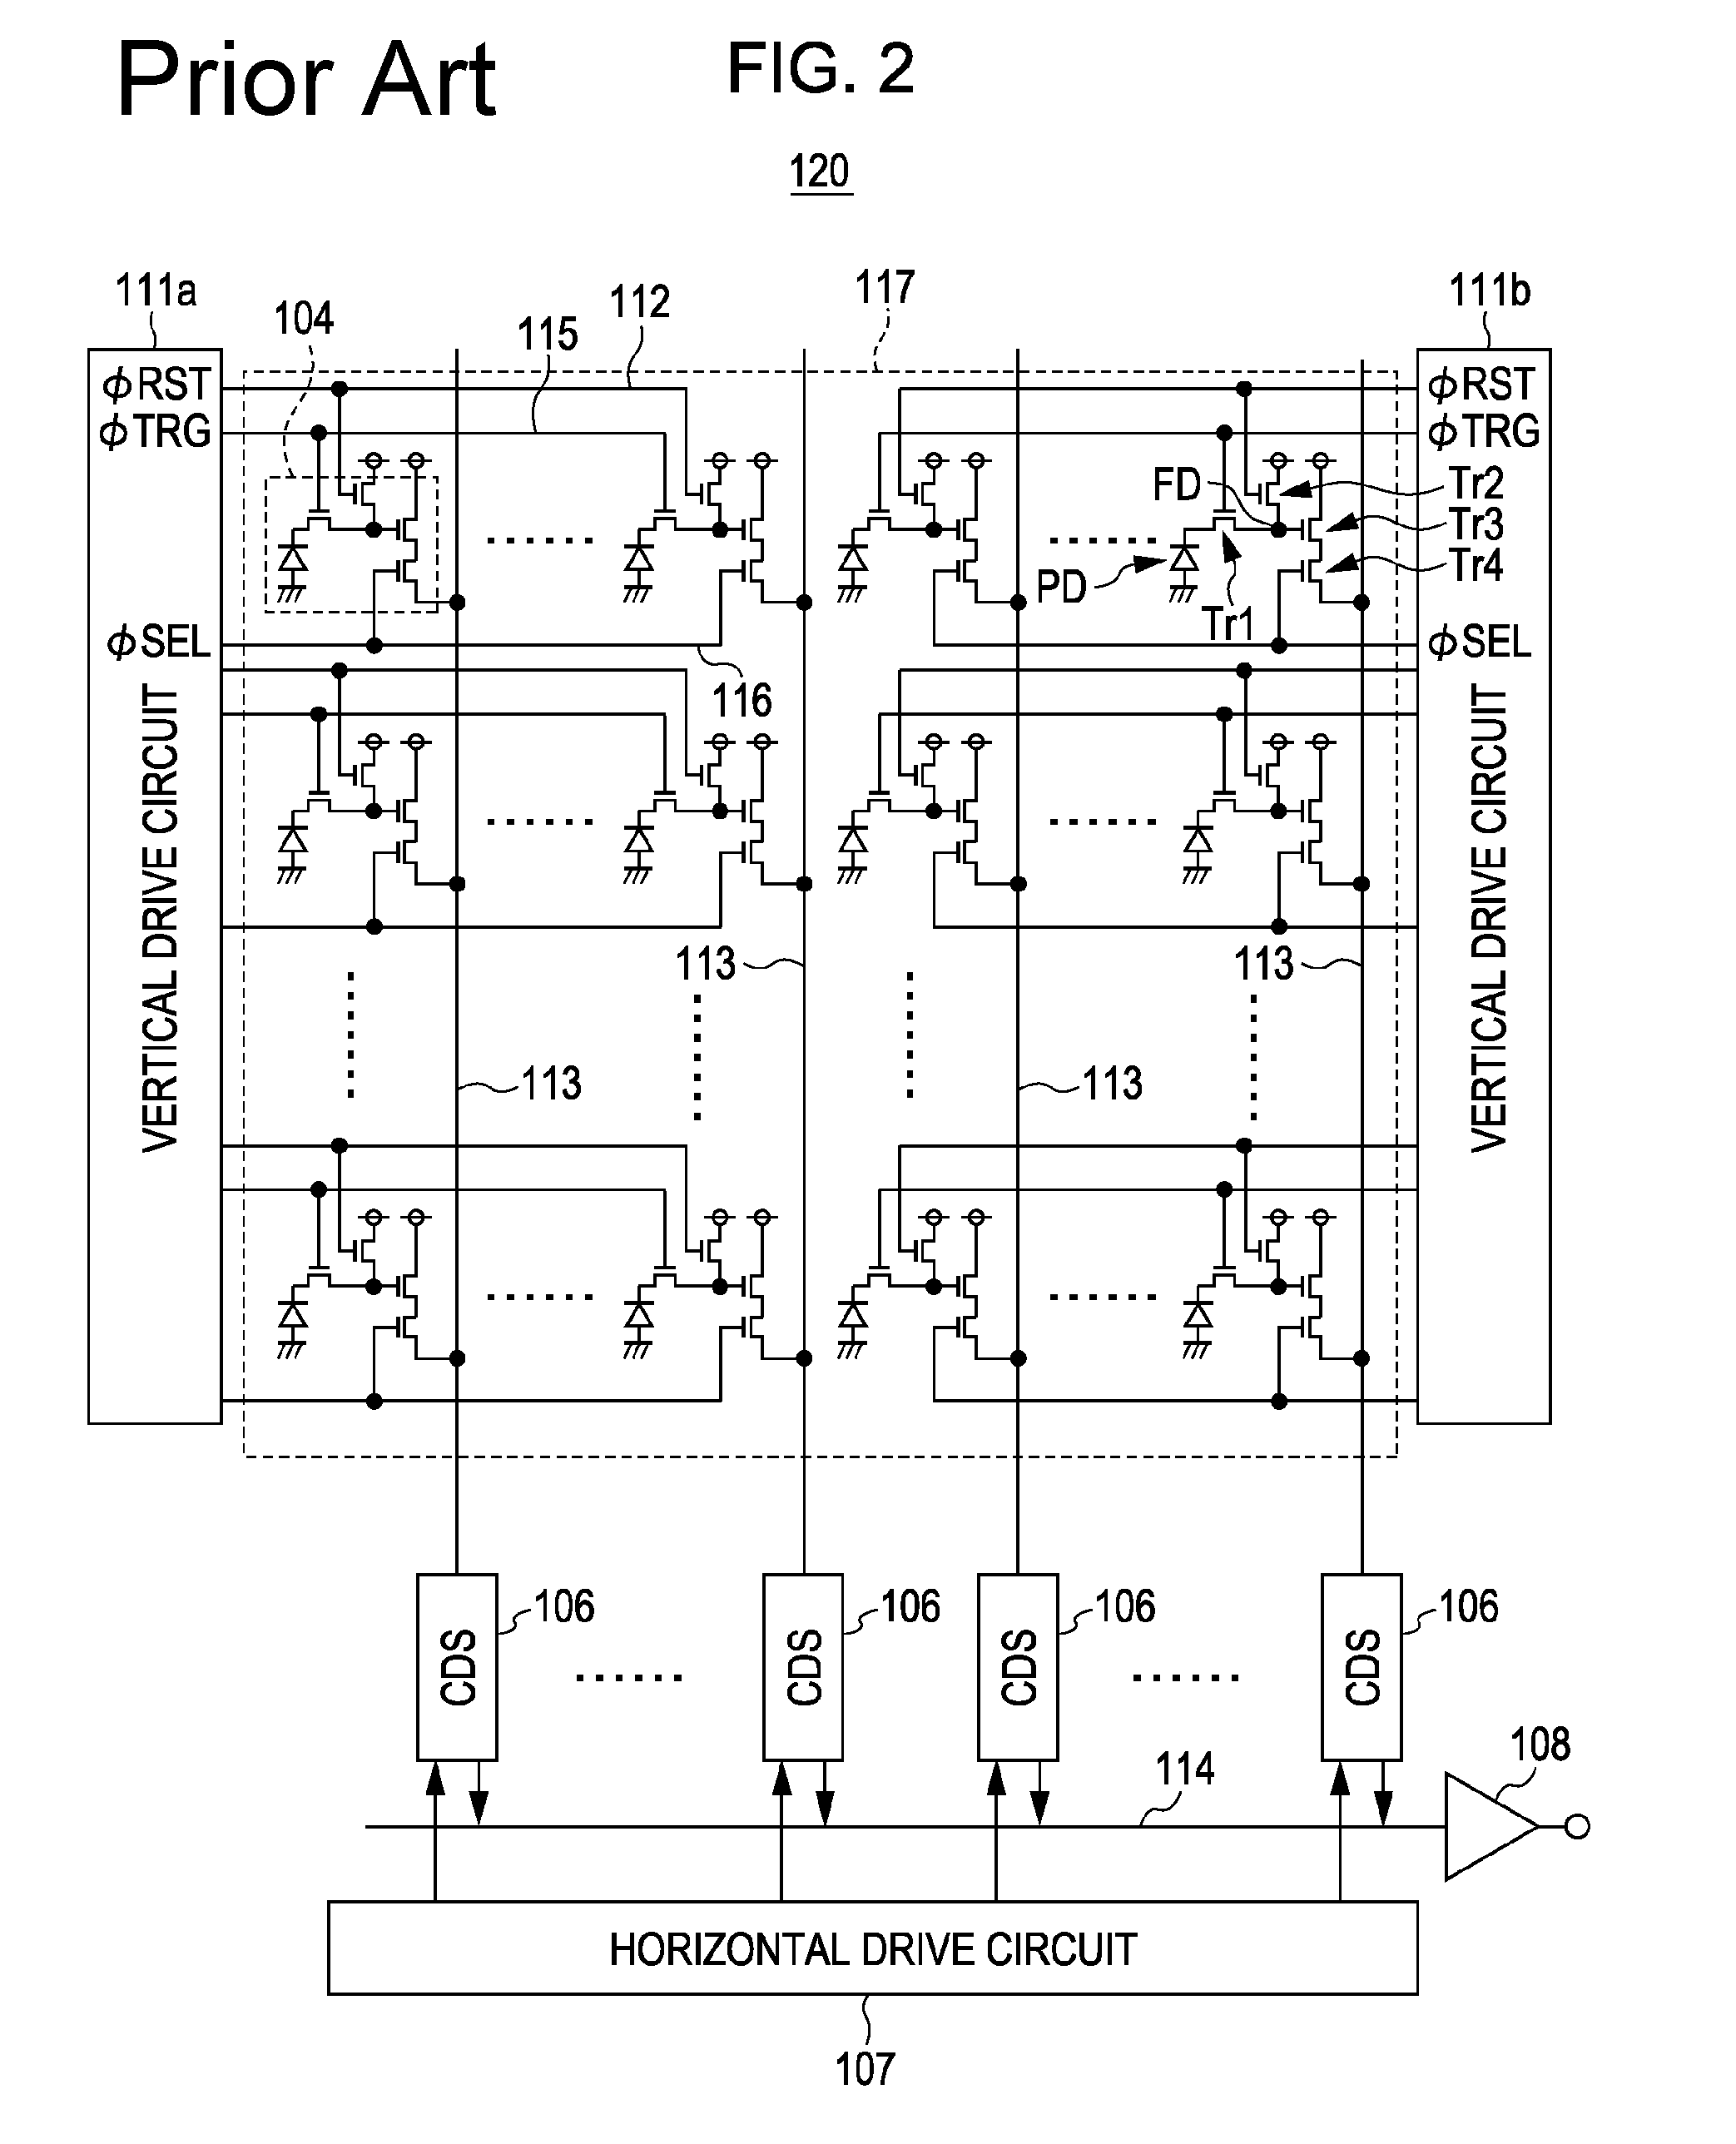 Solid-state imaging device with stacked sensor and processing chips